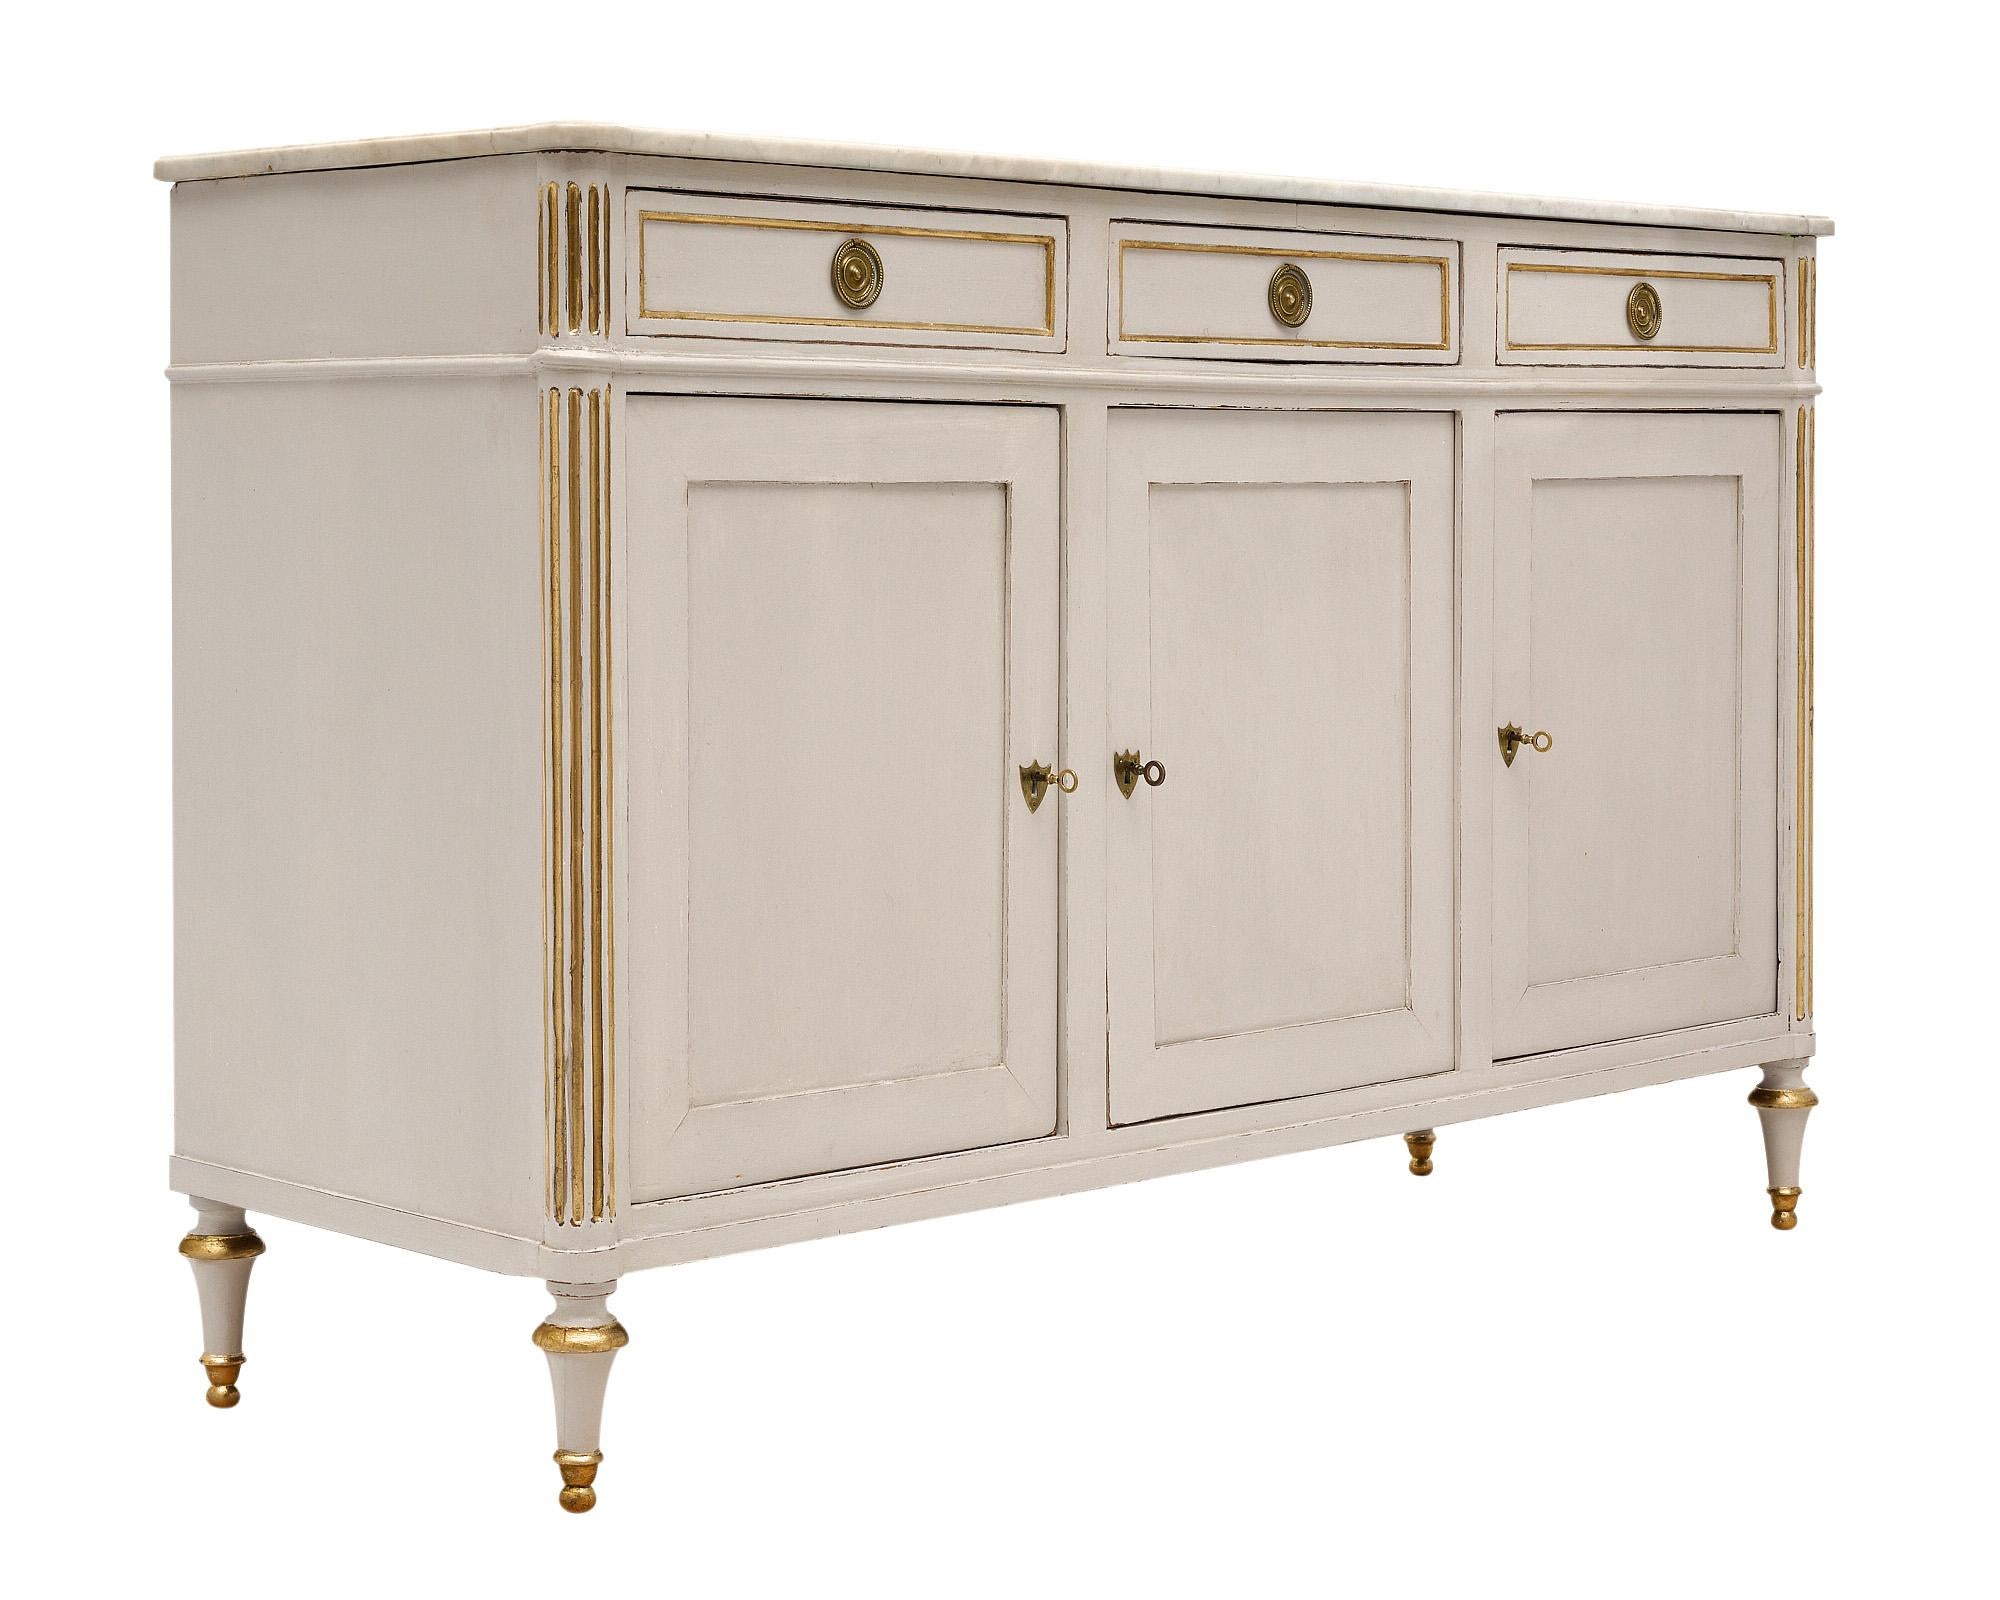 Buffet from France in the Louis XVI style. This case piece has been painted in a cream colored milk paint with 23 carat gold leaf in the fluted detailing and feet. There are three dovetailed drawers and three doors all with original, finely cast